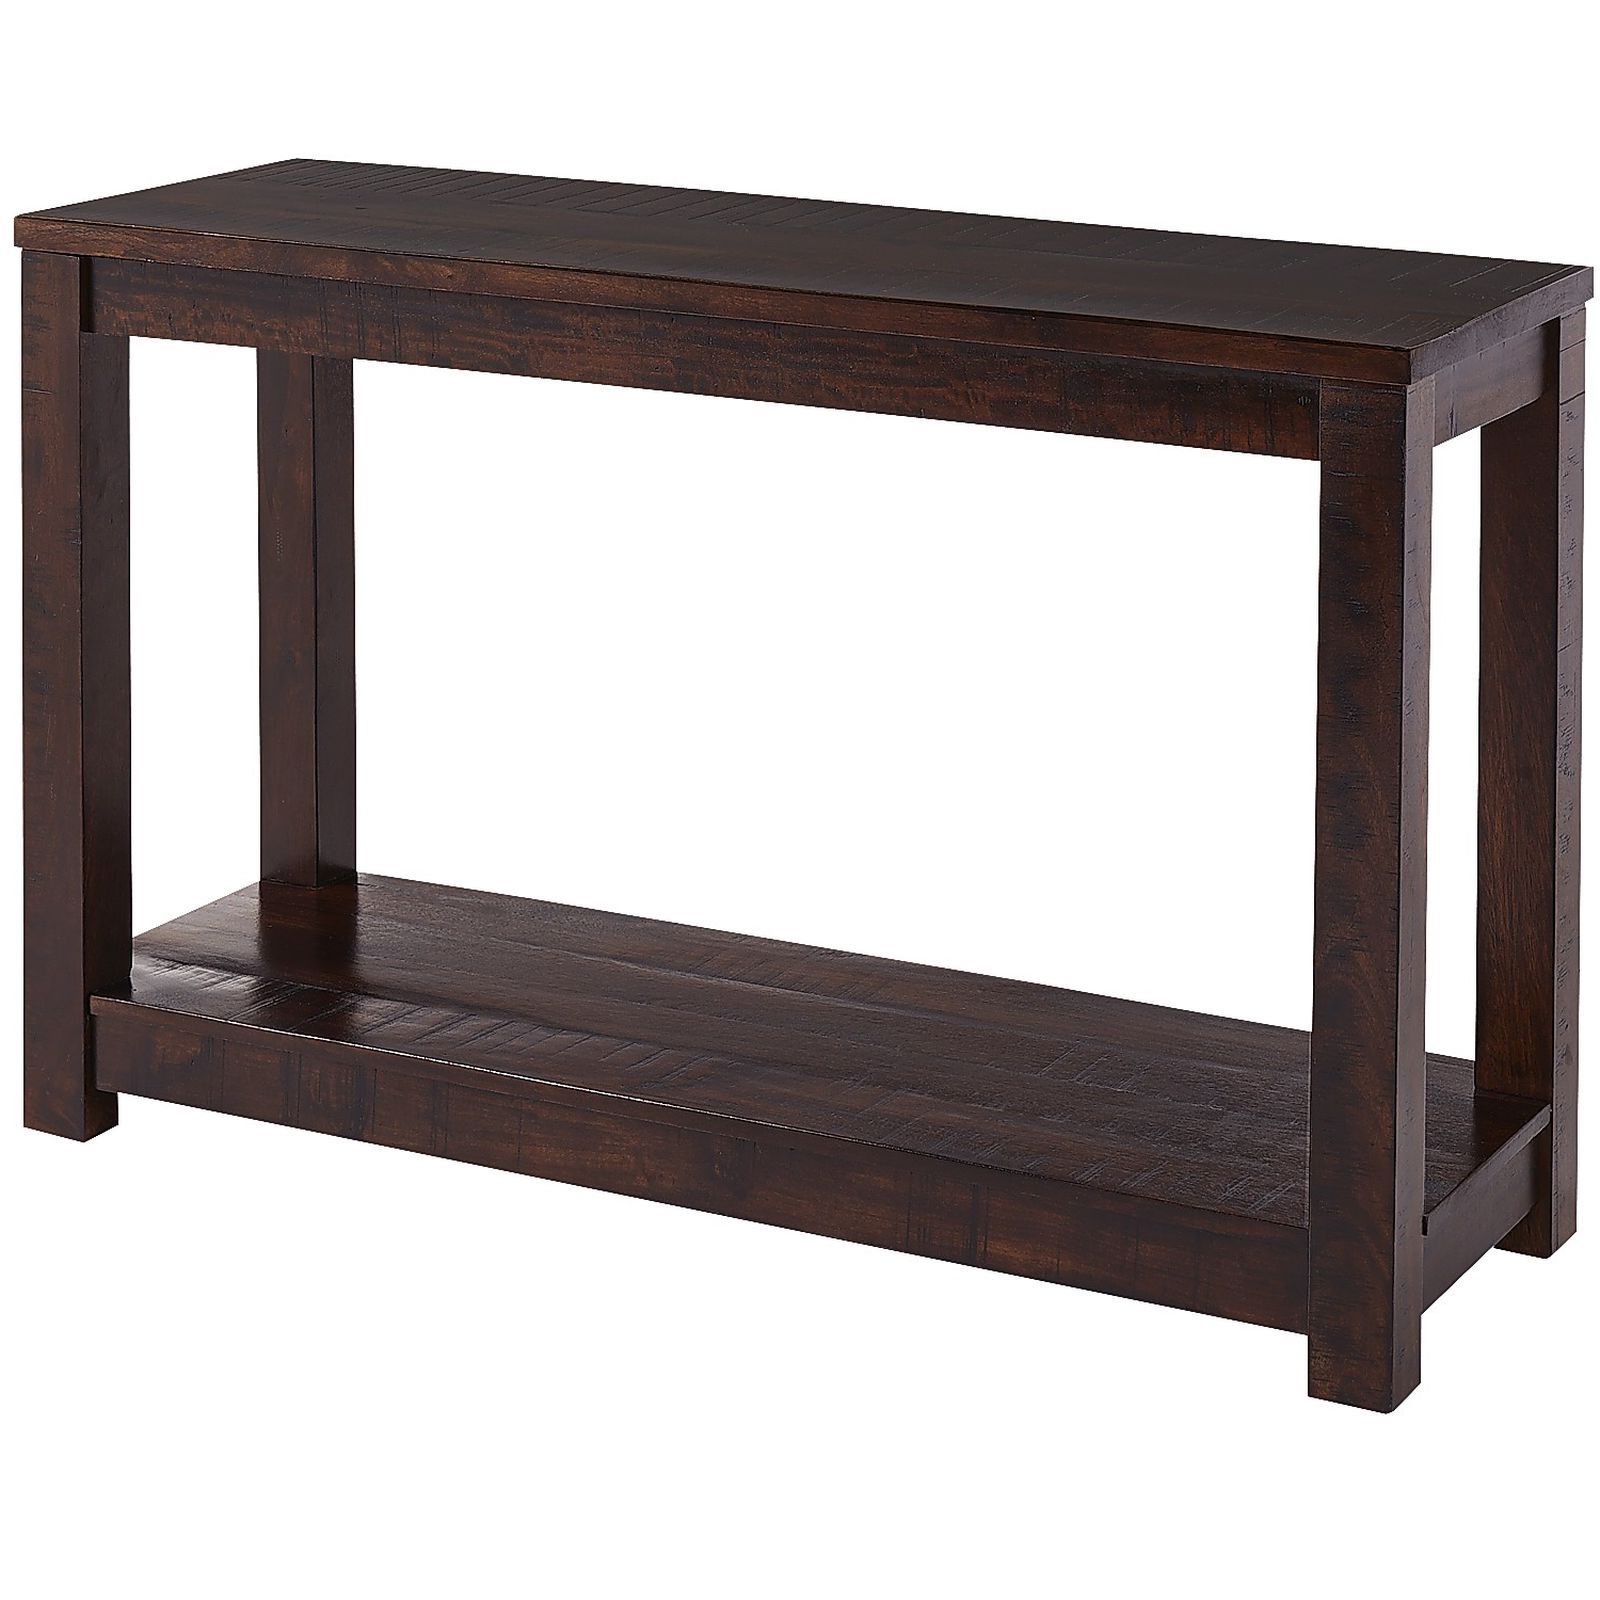 Parsons Console Table Wish Tobacco Brown Pier 1 Imports Regarding 16 Inside Widely Used Intarsia Console Tables (View 10 of 20)